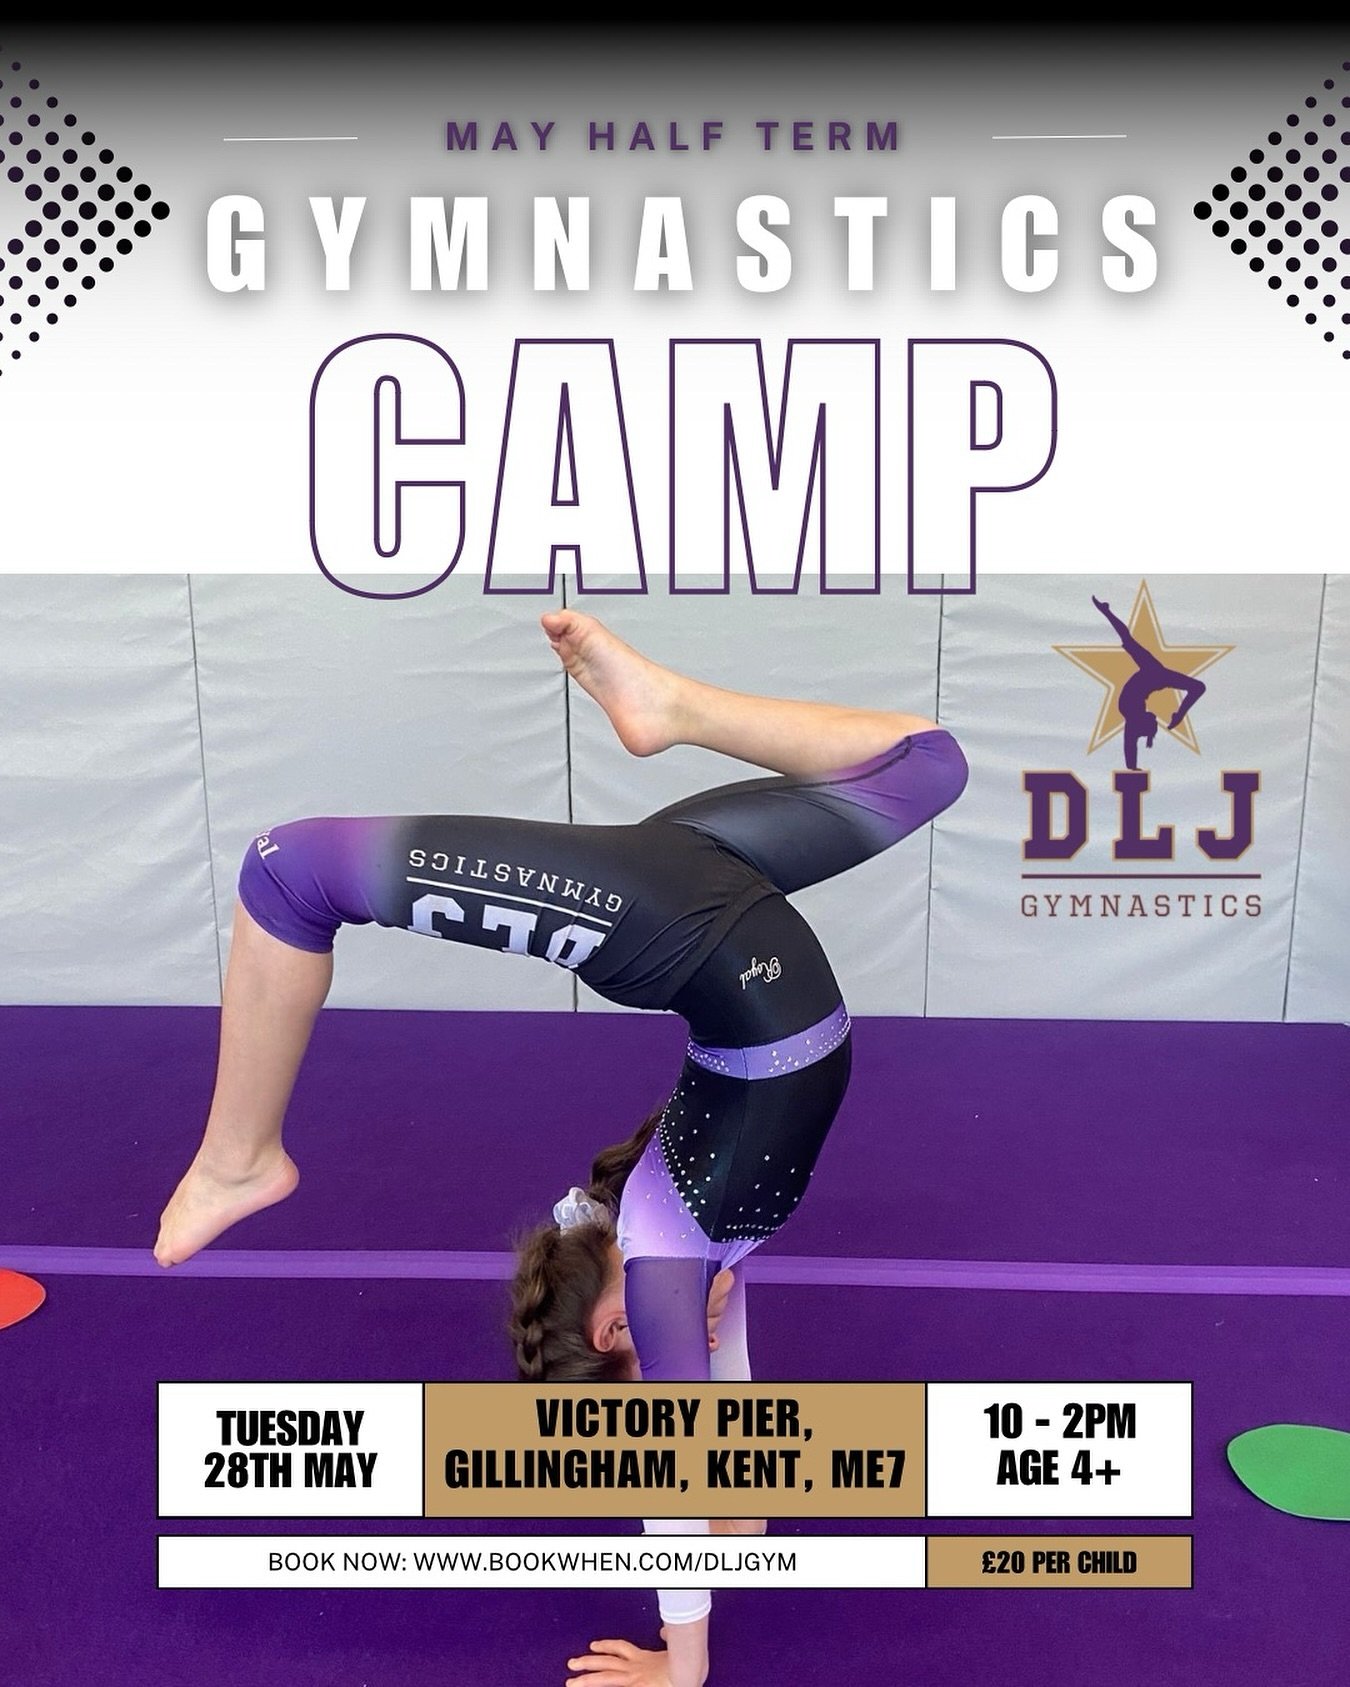 Join us for Half term gymnastics, FUN &amp; games at DLJ Gymnastics! 🙌

Children must be in school year Reception or above and everyone must bring a packed lunch with plenty to drink! 💜

🗓️ 28th May 
⏰ 10:00-2:00pm
📍 DLJ Gymnastics, Victory Pier,